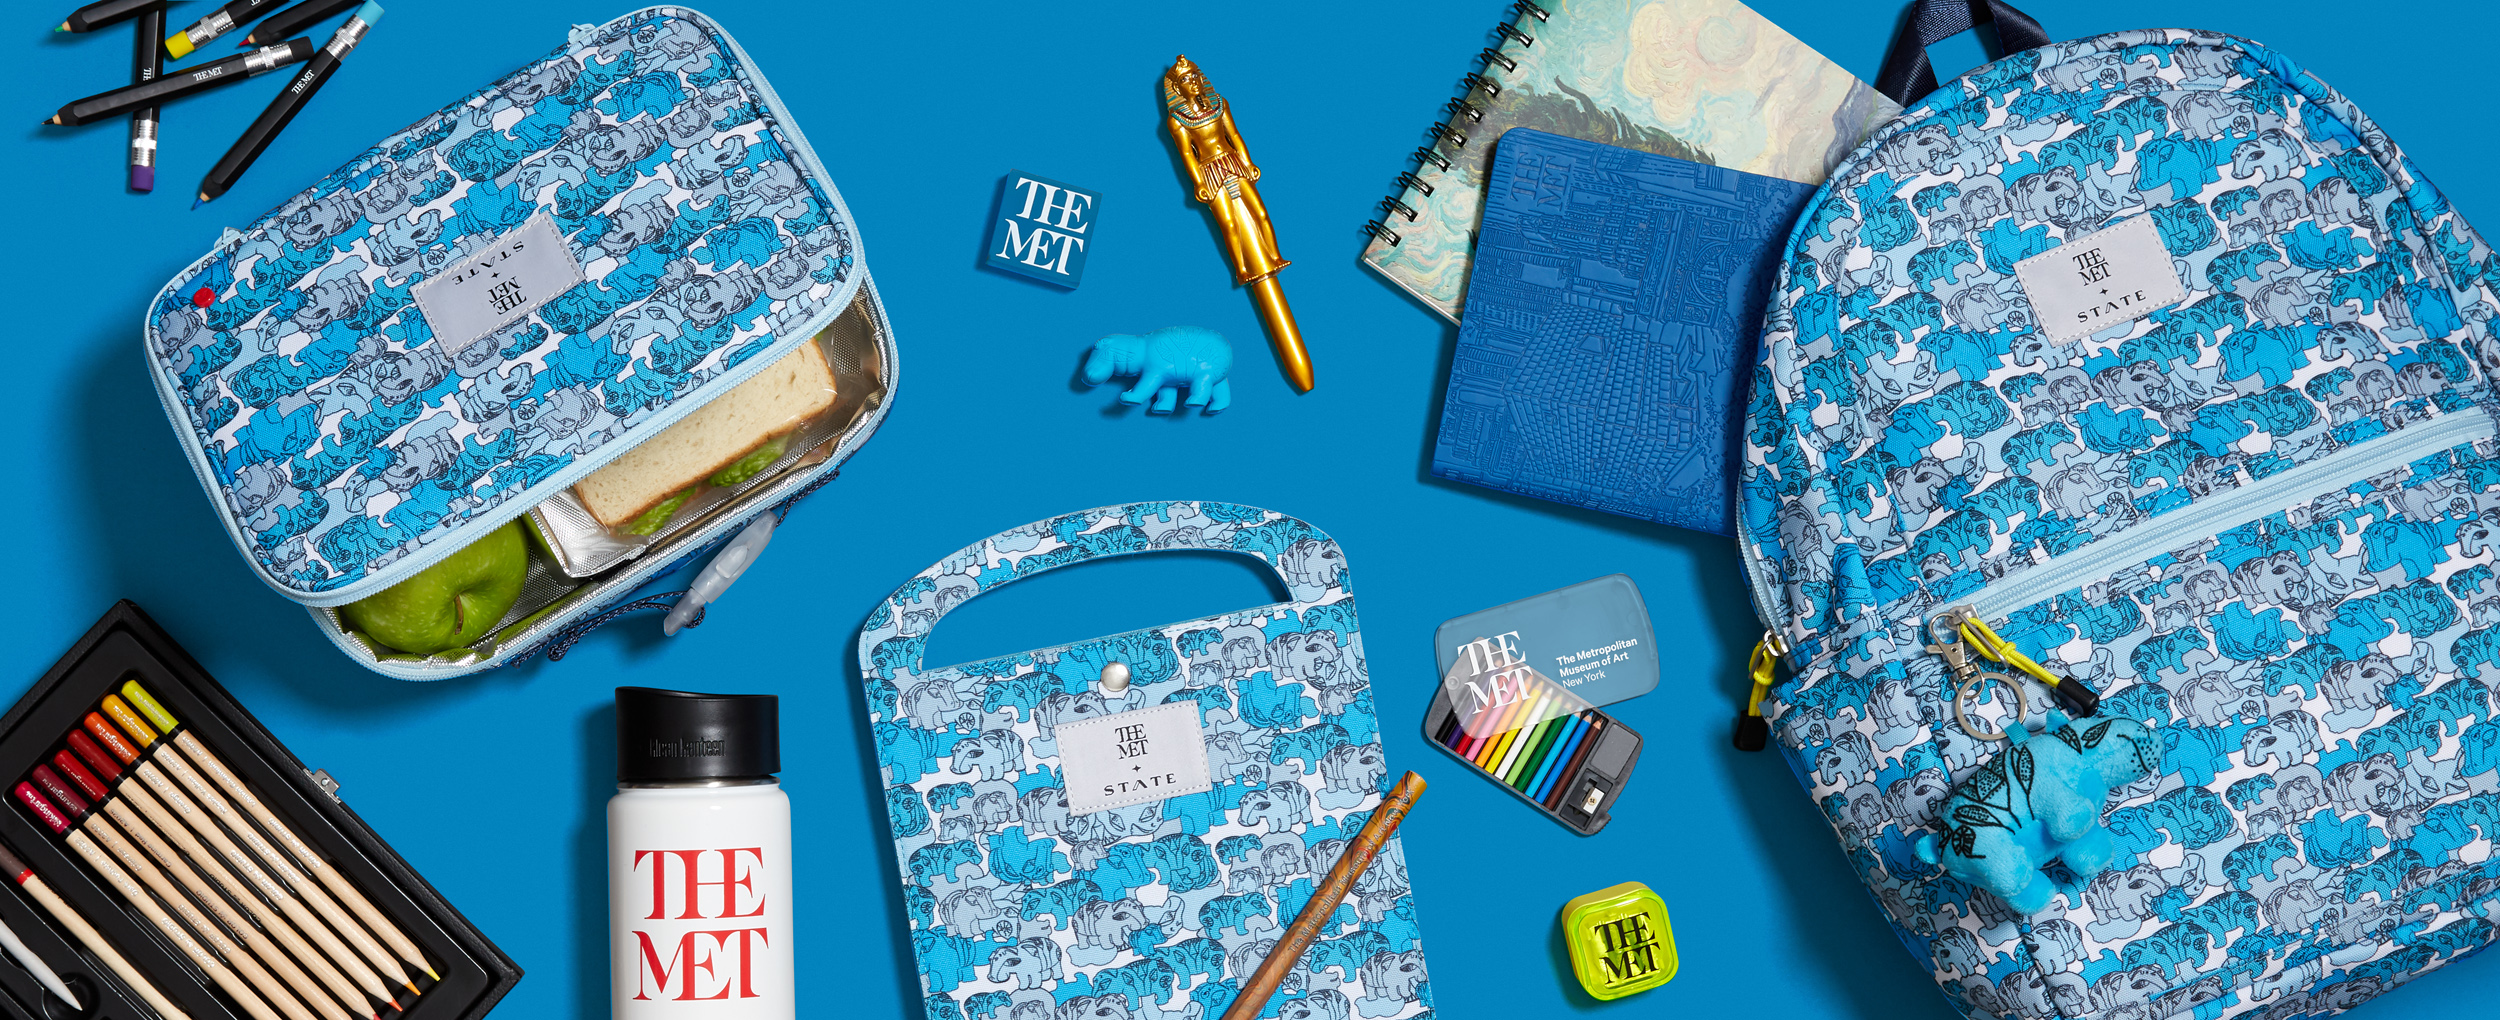 e-commerce header of the Met x State collaboration with hippo backpack, lunch box, art folio, and supplies on blue background